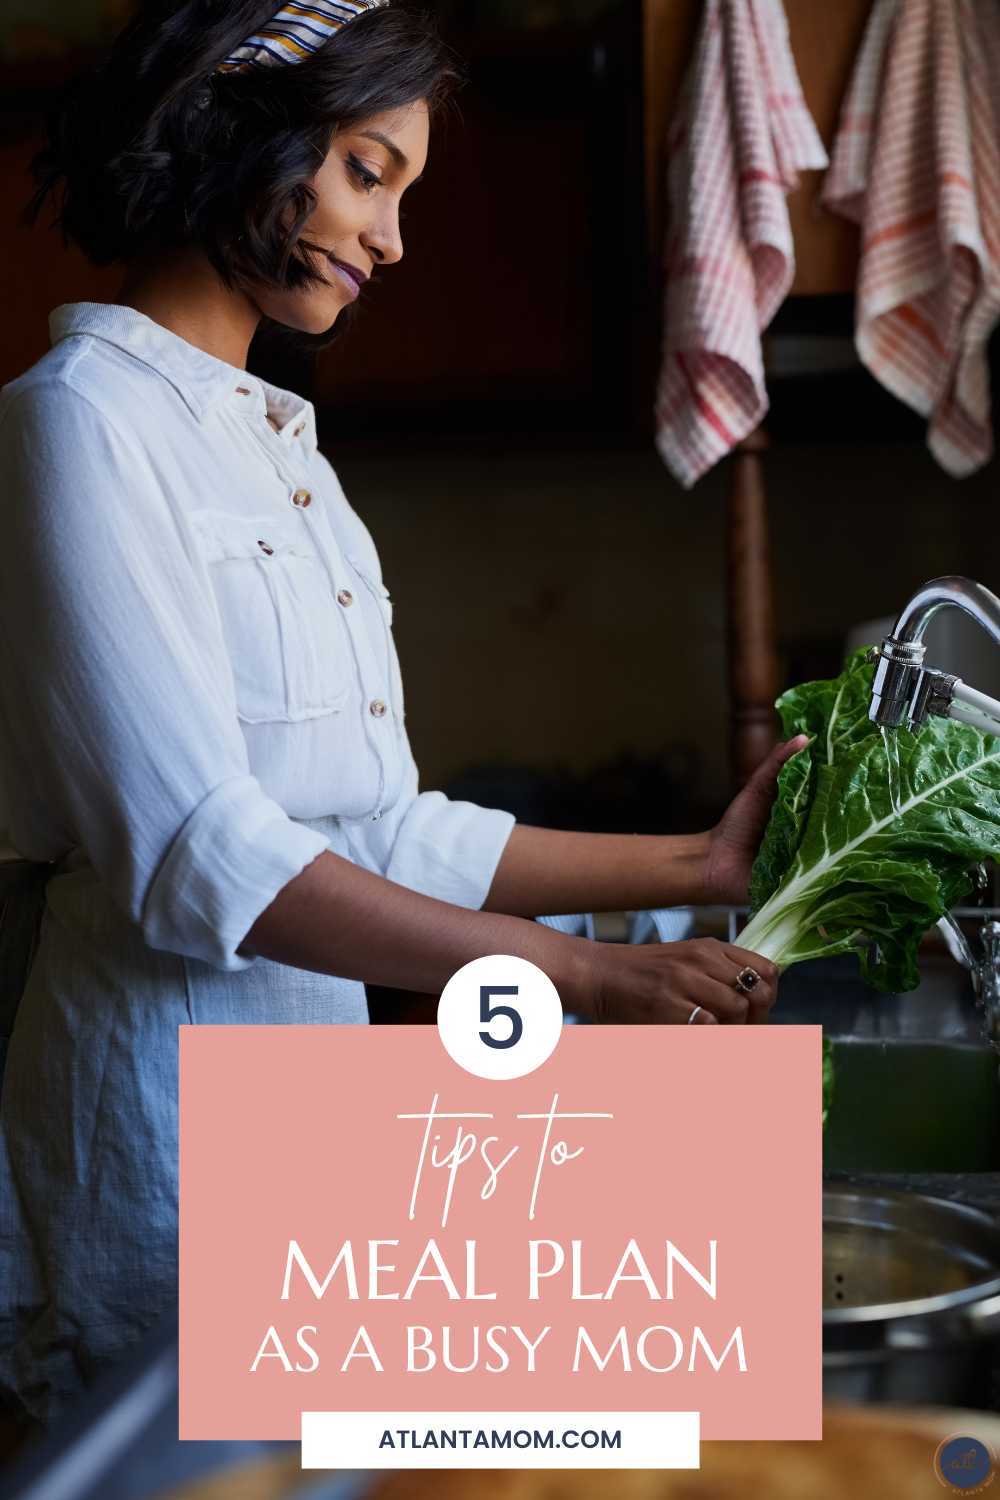 5 Tips to Meal Plan as a Busy Mom